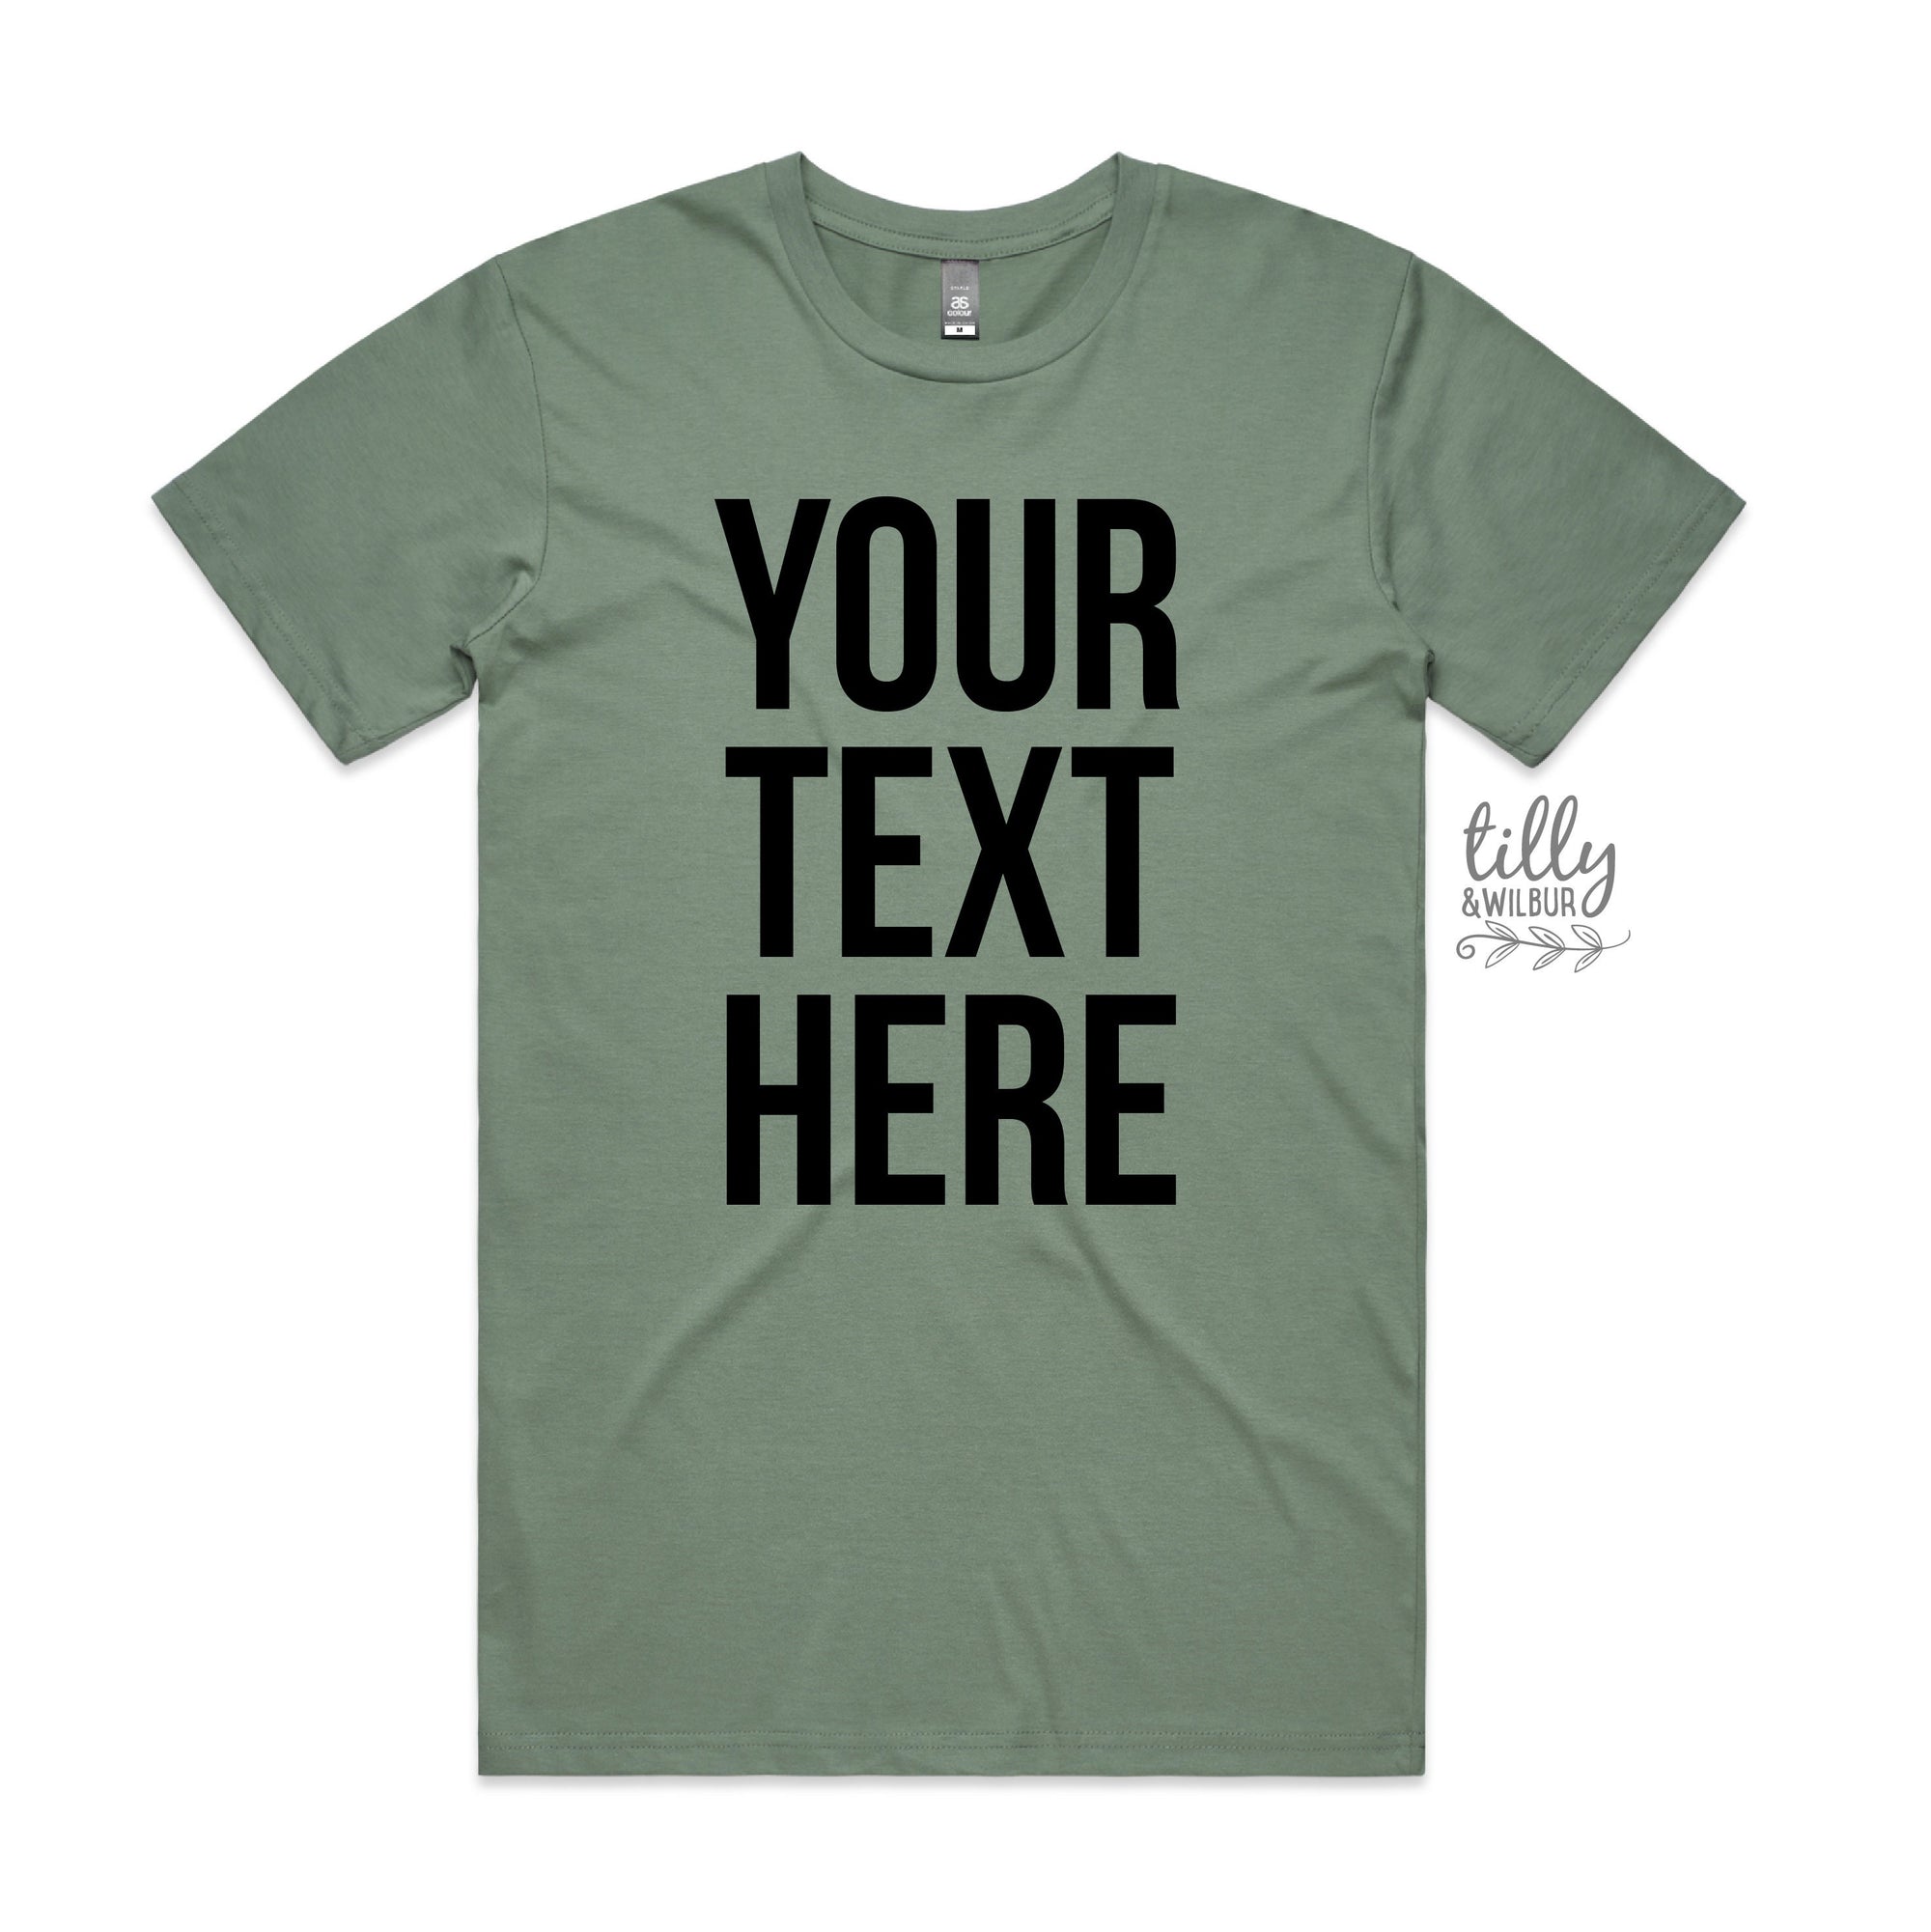 Your Text Here Men's T-Shirt, Design Your Own T-Shirt, Custom Text Here T-Shirt, Custom Men's T-Shirt, Custom T-Shirt, Personalised T-Shirt